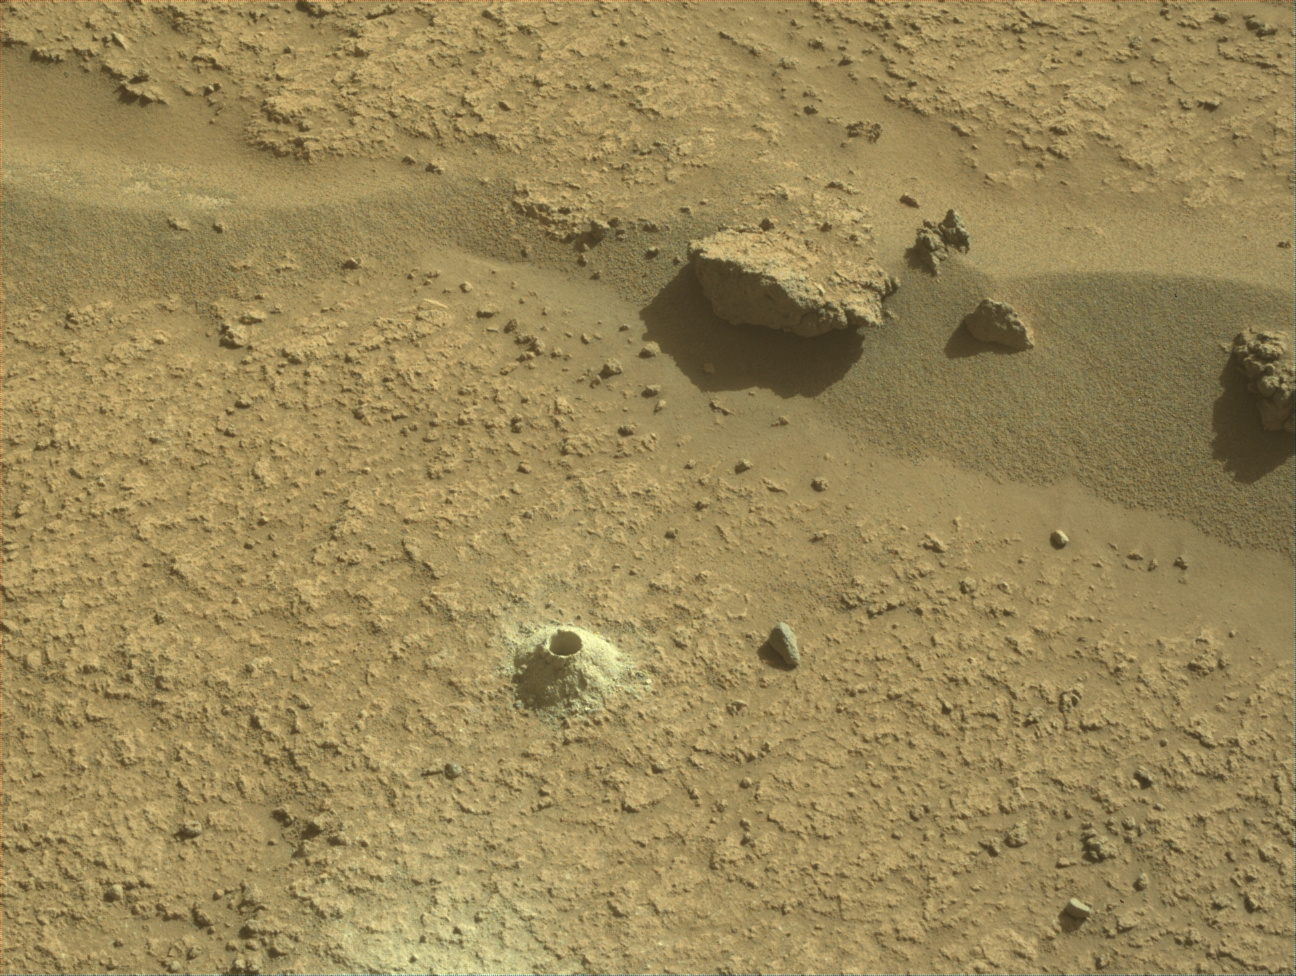 Image taken was taken by the Mars Perseverance rover after collecting the rock sample 21 at Pilot Mountain. There is a drill hole of where the sample was collected along with a few rocks surrounding the area.